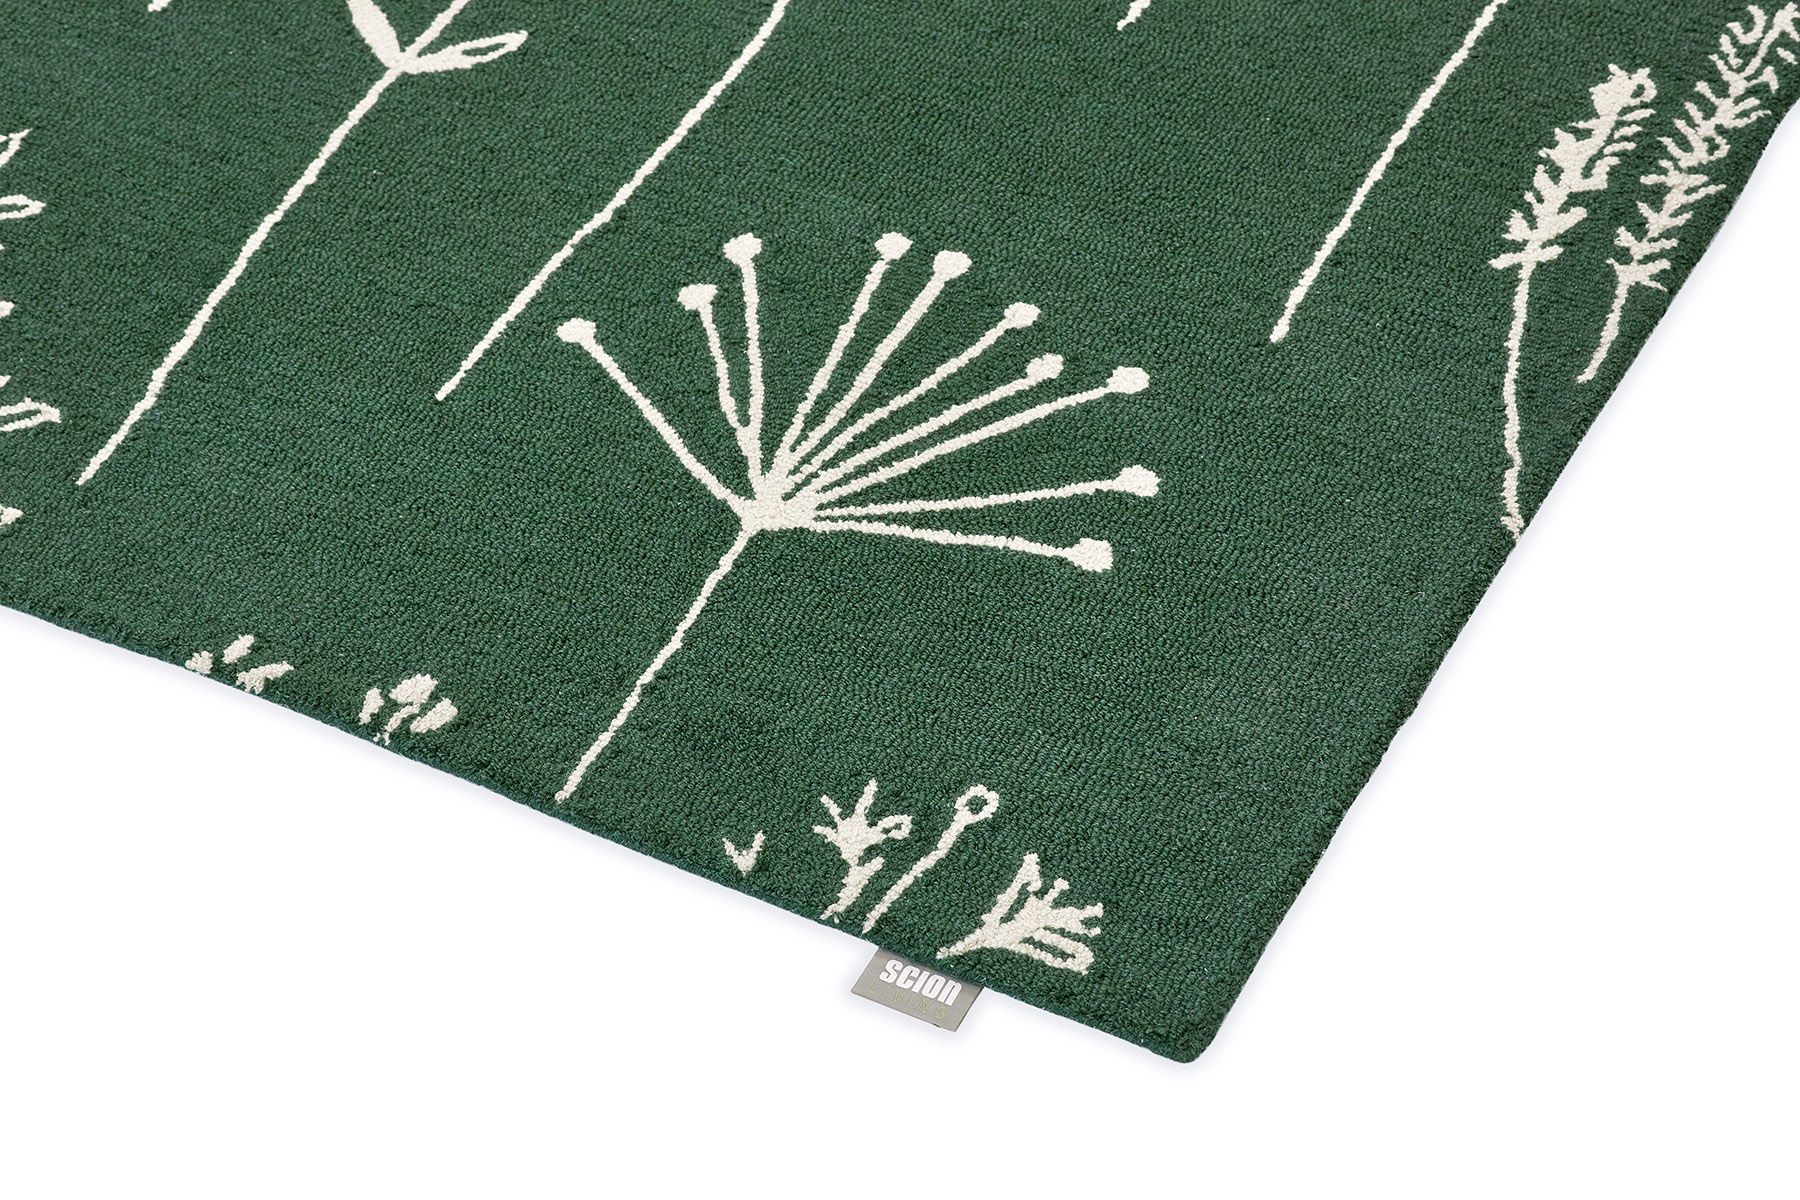 Stipa-Forest Rug